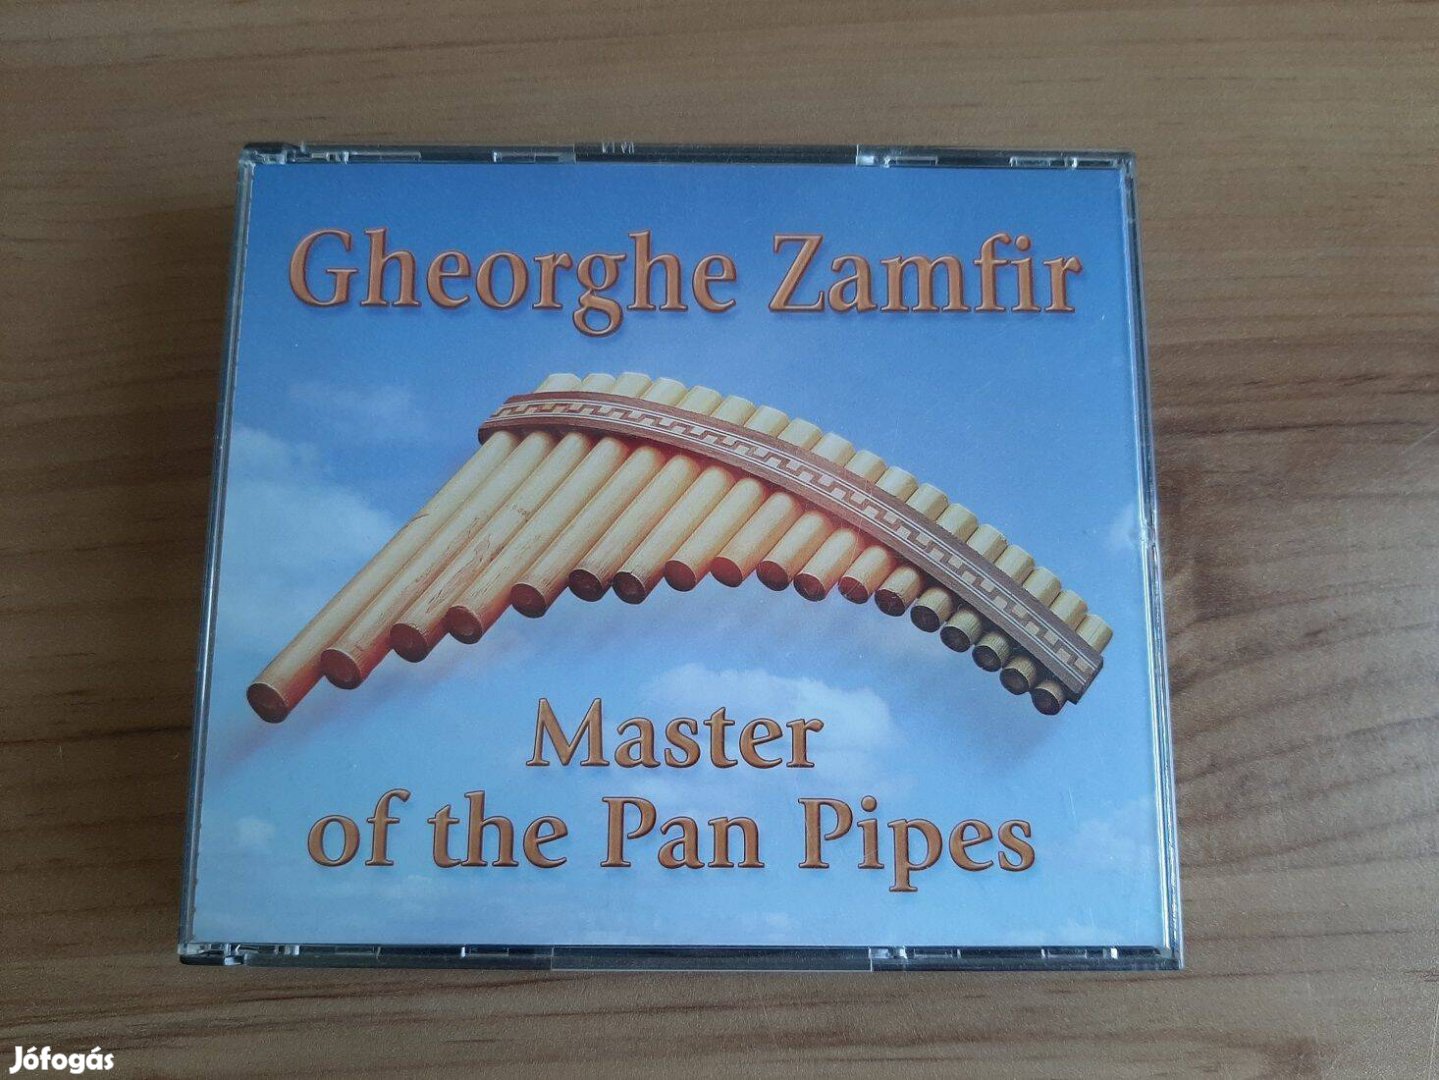 Gheorghe Zamfir Master of the Pan Pipes Reader's Digest 3 CD